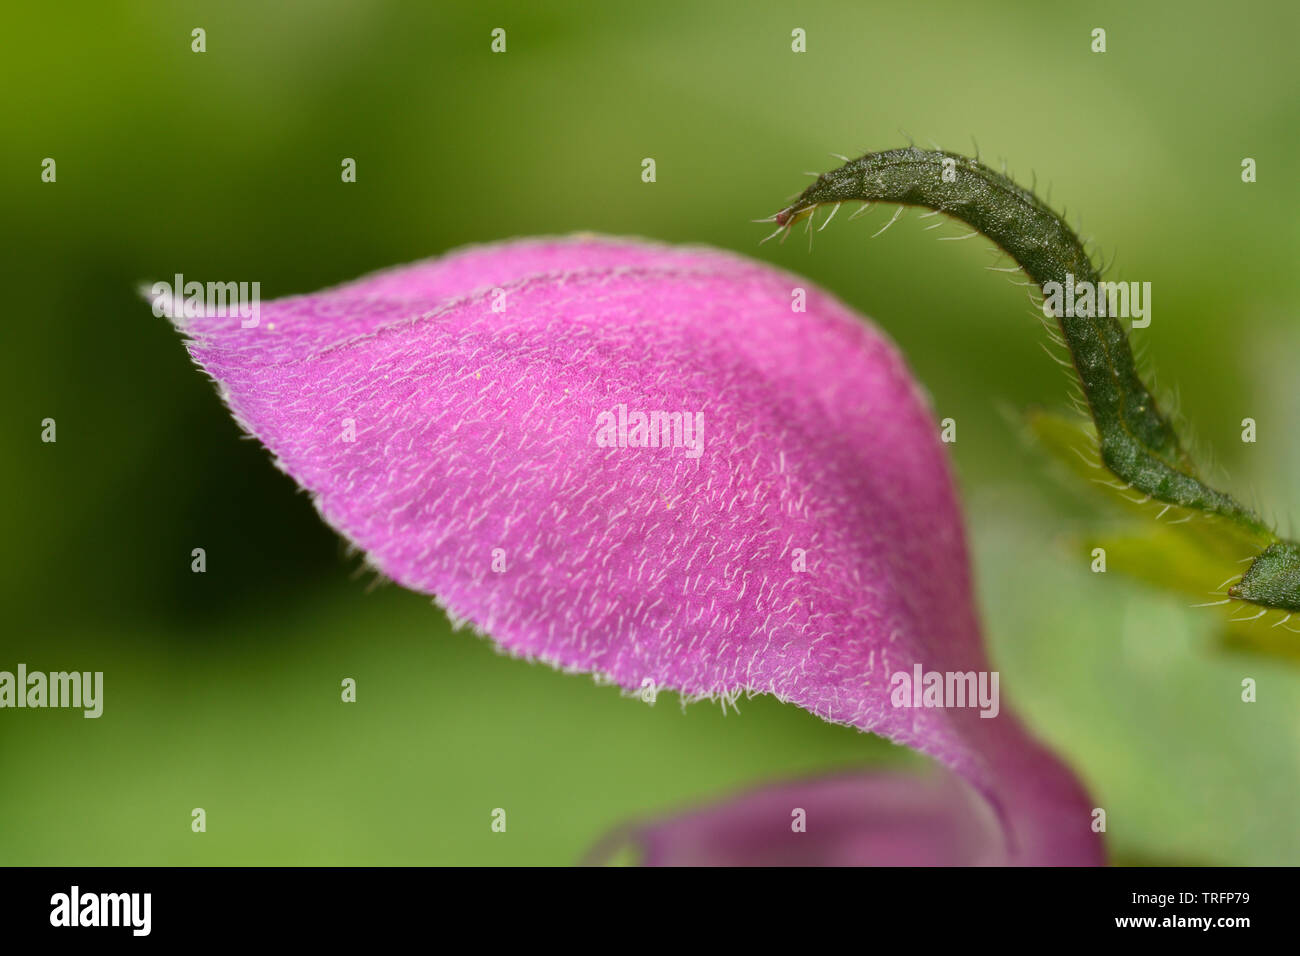 Close up of Hairy pink flower and spiny young leaf of Lamium or Dead Nettle groundcover in outdoor garden Stock Photo